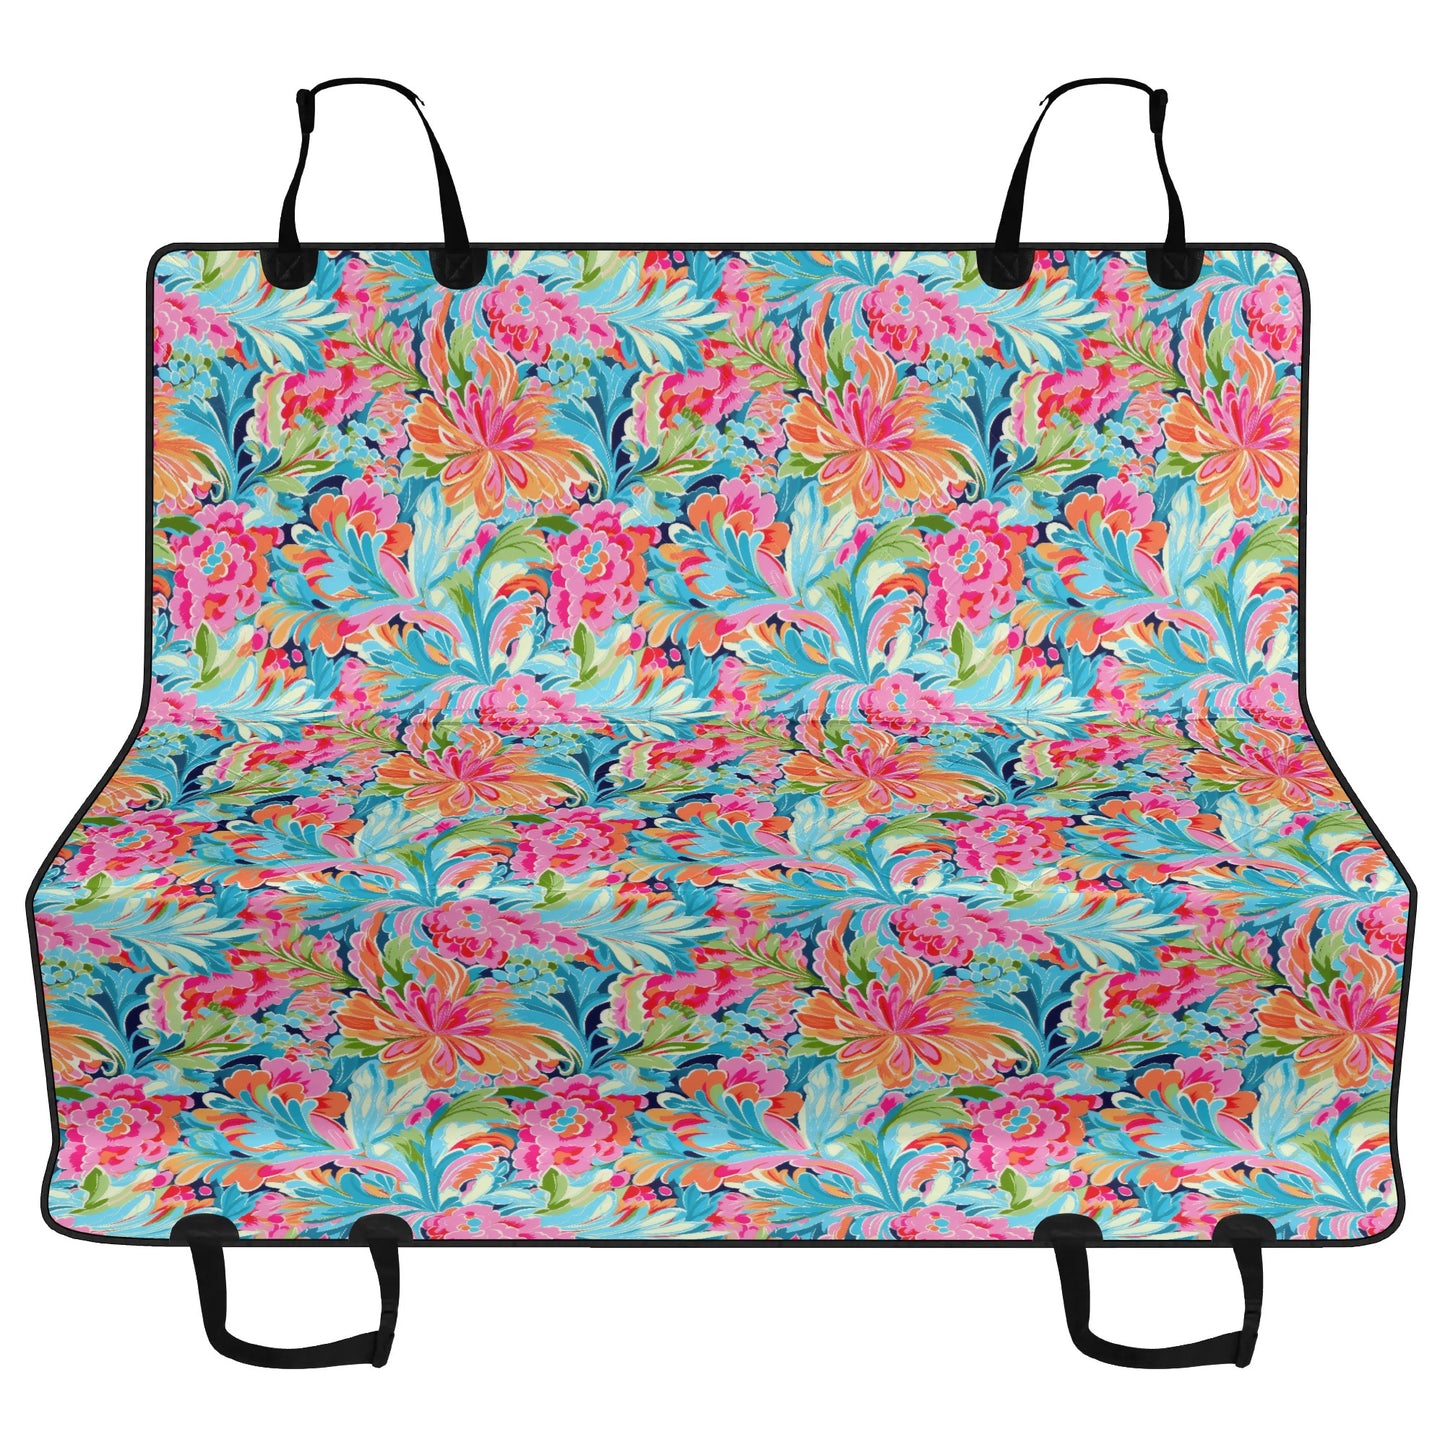 Tropical Radiance: Bursting Summer Blooms in Teal, Orange, and Pink Car Pet Seat Cover 2 Sizes